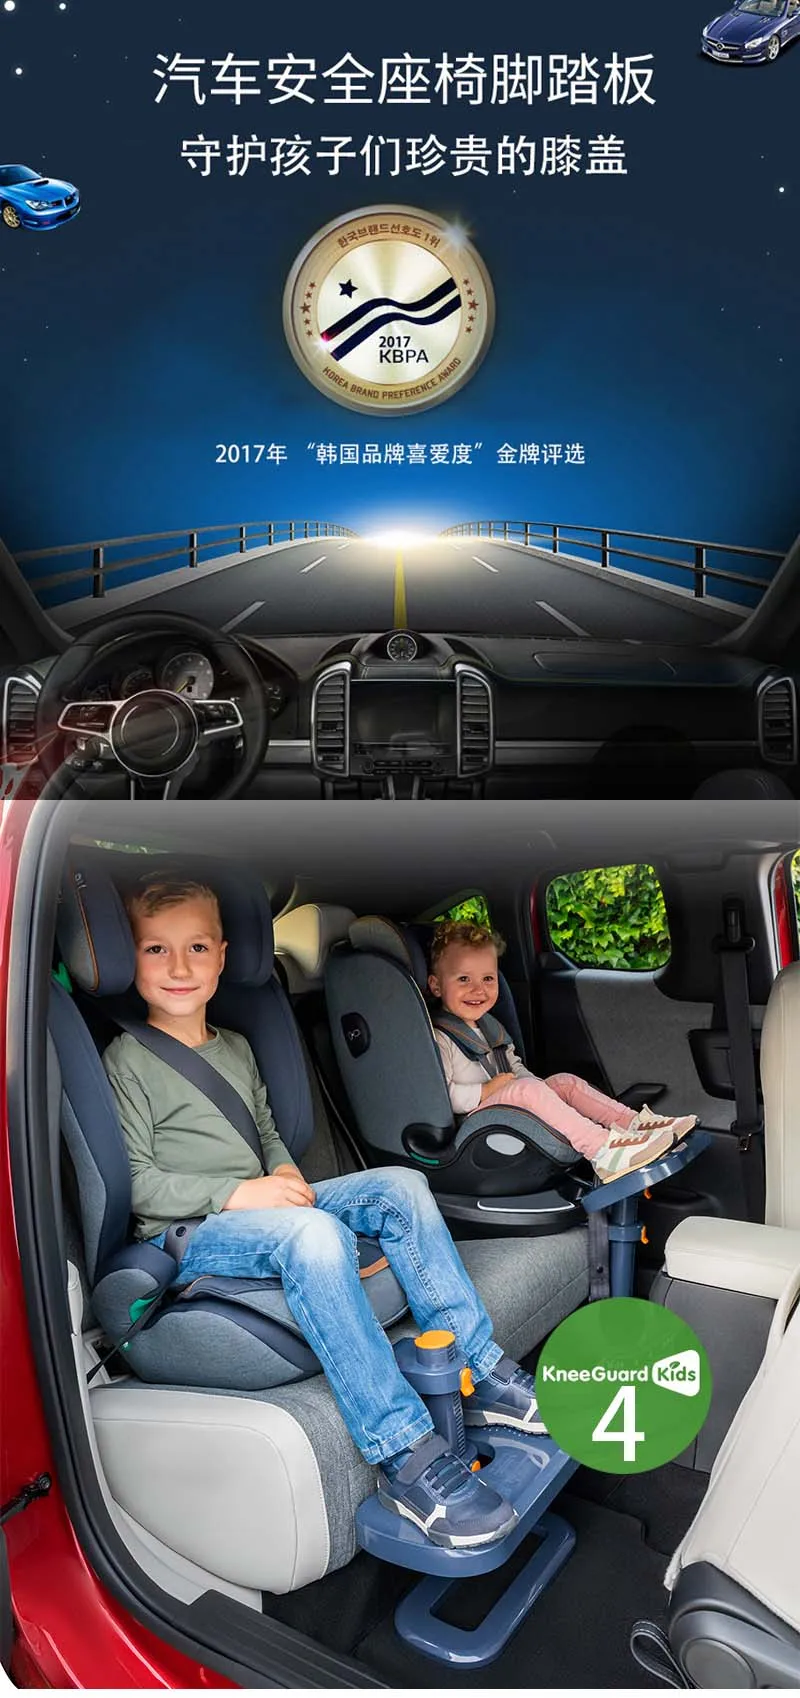 https://ae01.alicdn.com/kf/S6161e41098044e3baa02f23a1ac34a11g/Kneeguard-Kids-Car-Seat-Foot-Rest-for-Children-and-Babies-Footrest-is-Compatible-Seats-for-Easy.jpg